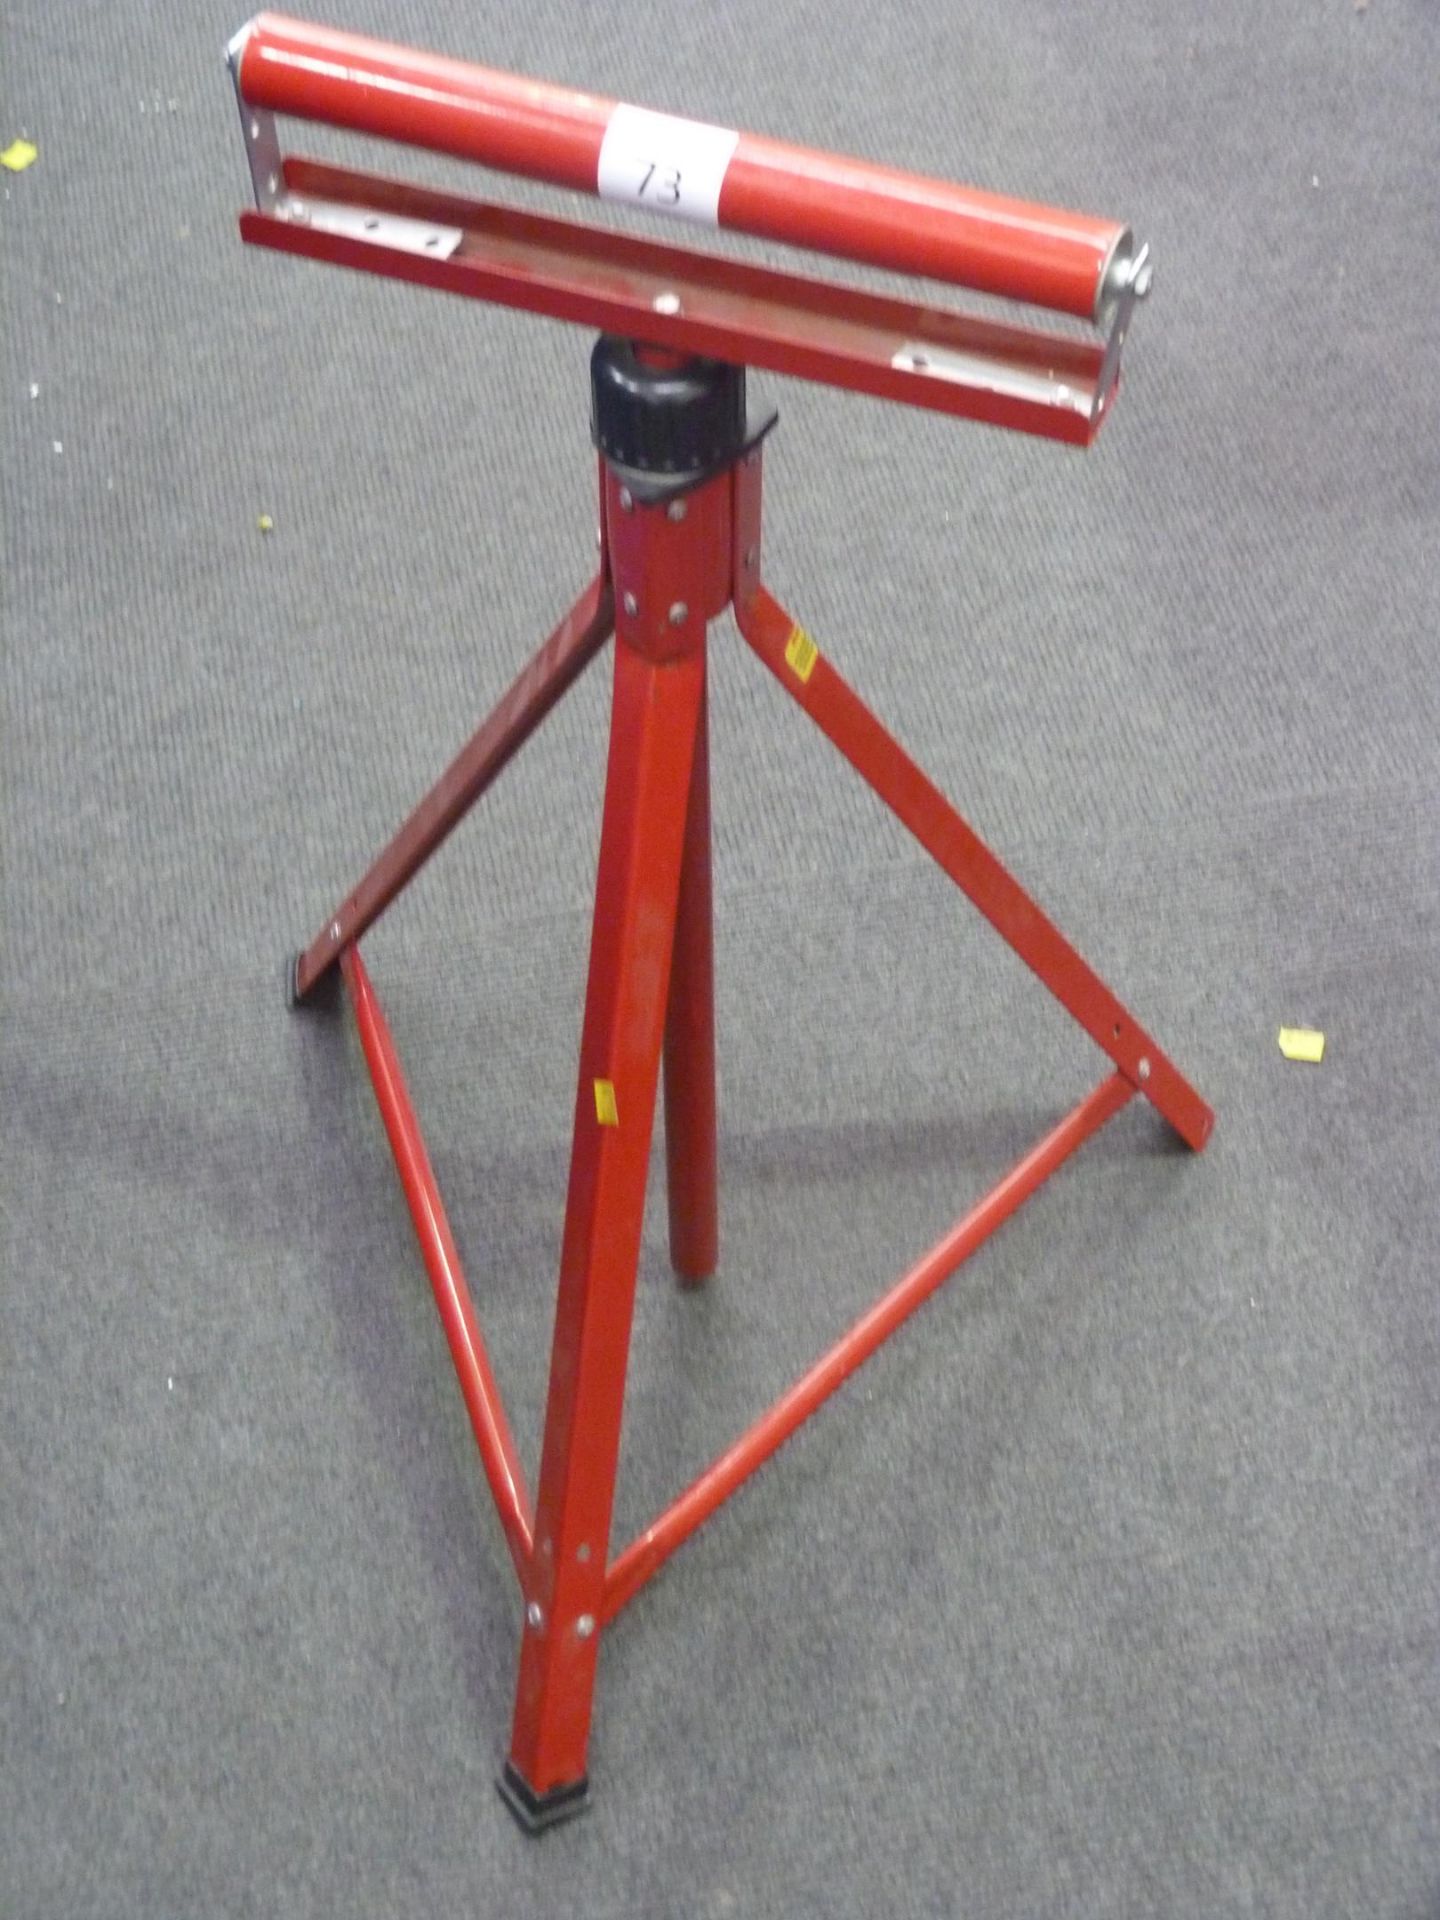 An Adjustable Height Roller Stand